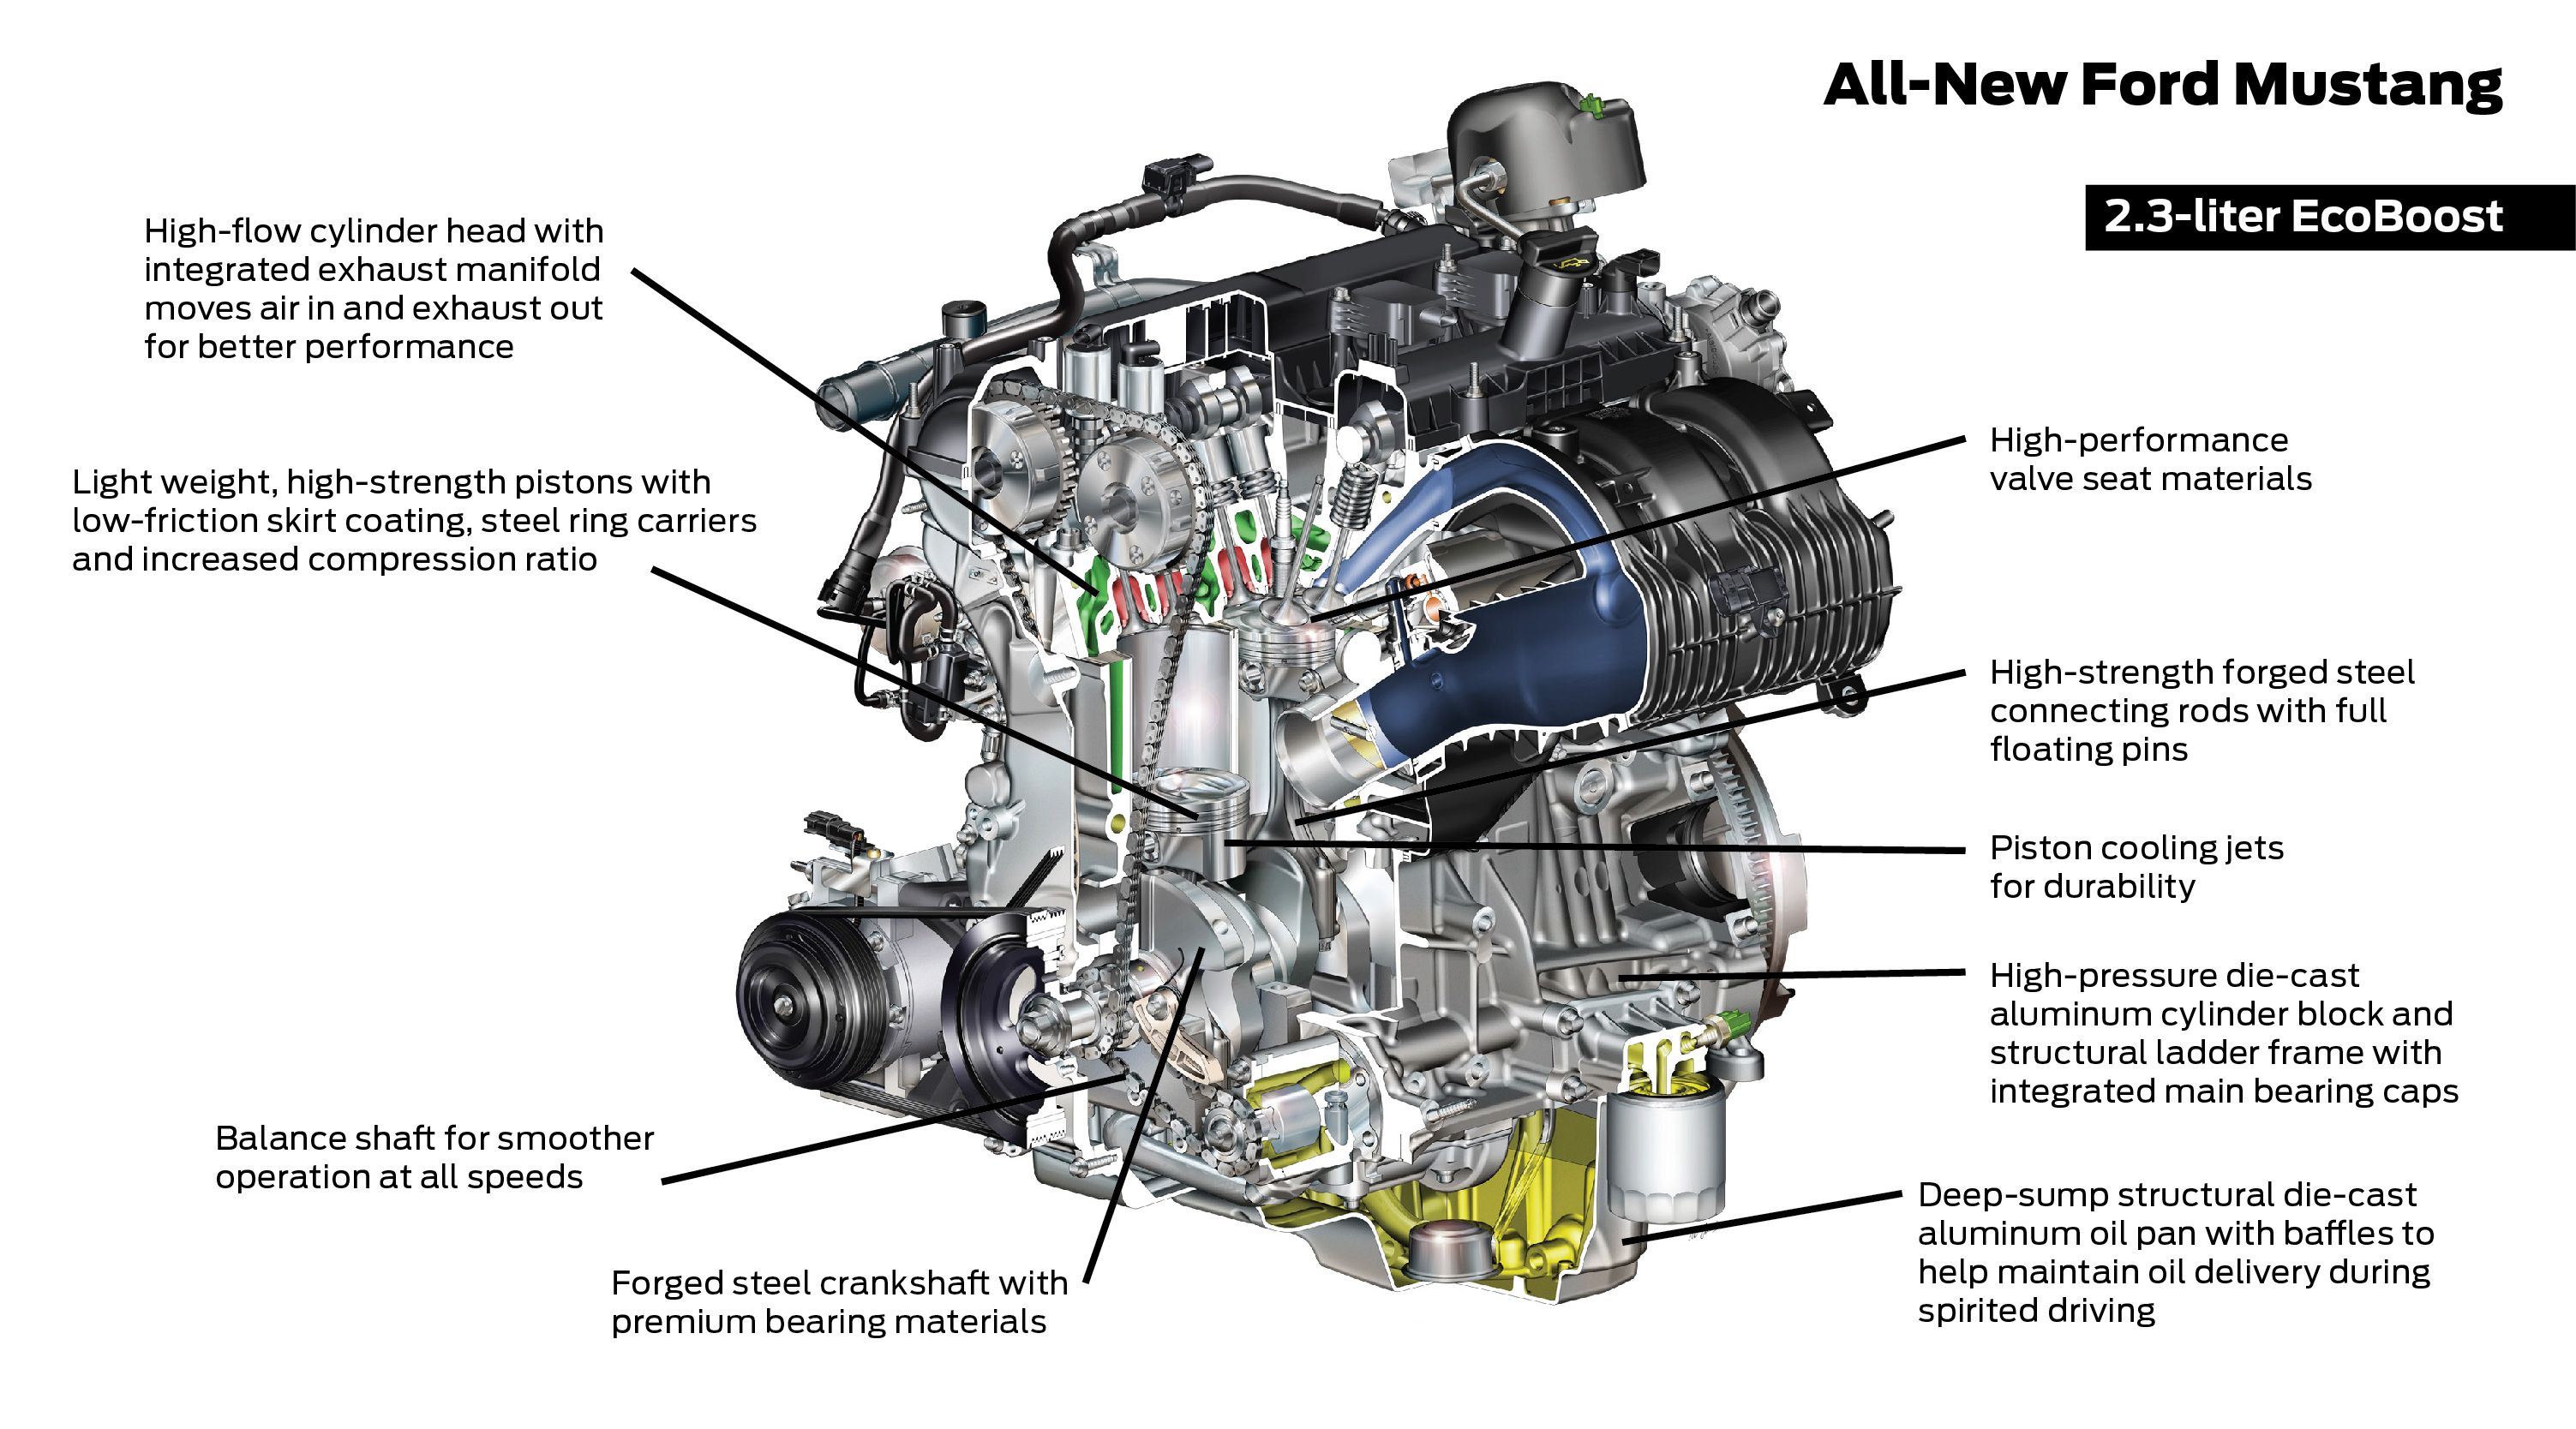 a-simple-guide-to-the-2015-ford-mustang-23-liter-ecoboost-engine-92520_1